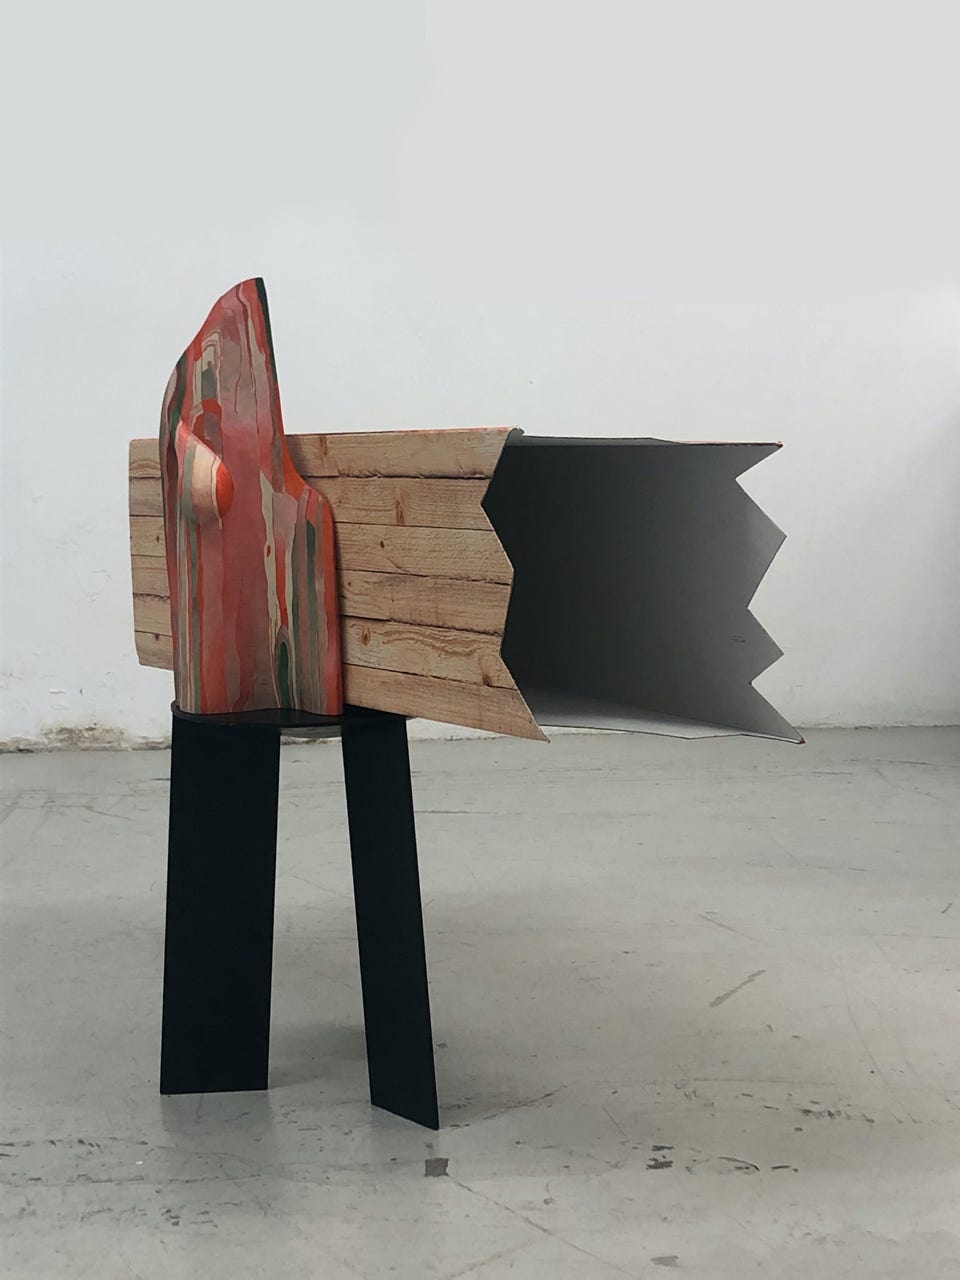 Decor, 2020, installation (hand-made oil painted wood sculpture, ready-made table by HAY, cardboard by Solits, woodstack design by Marcel Hellemons)